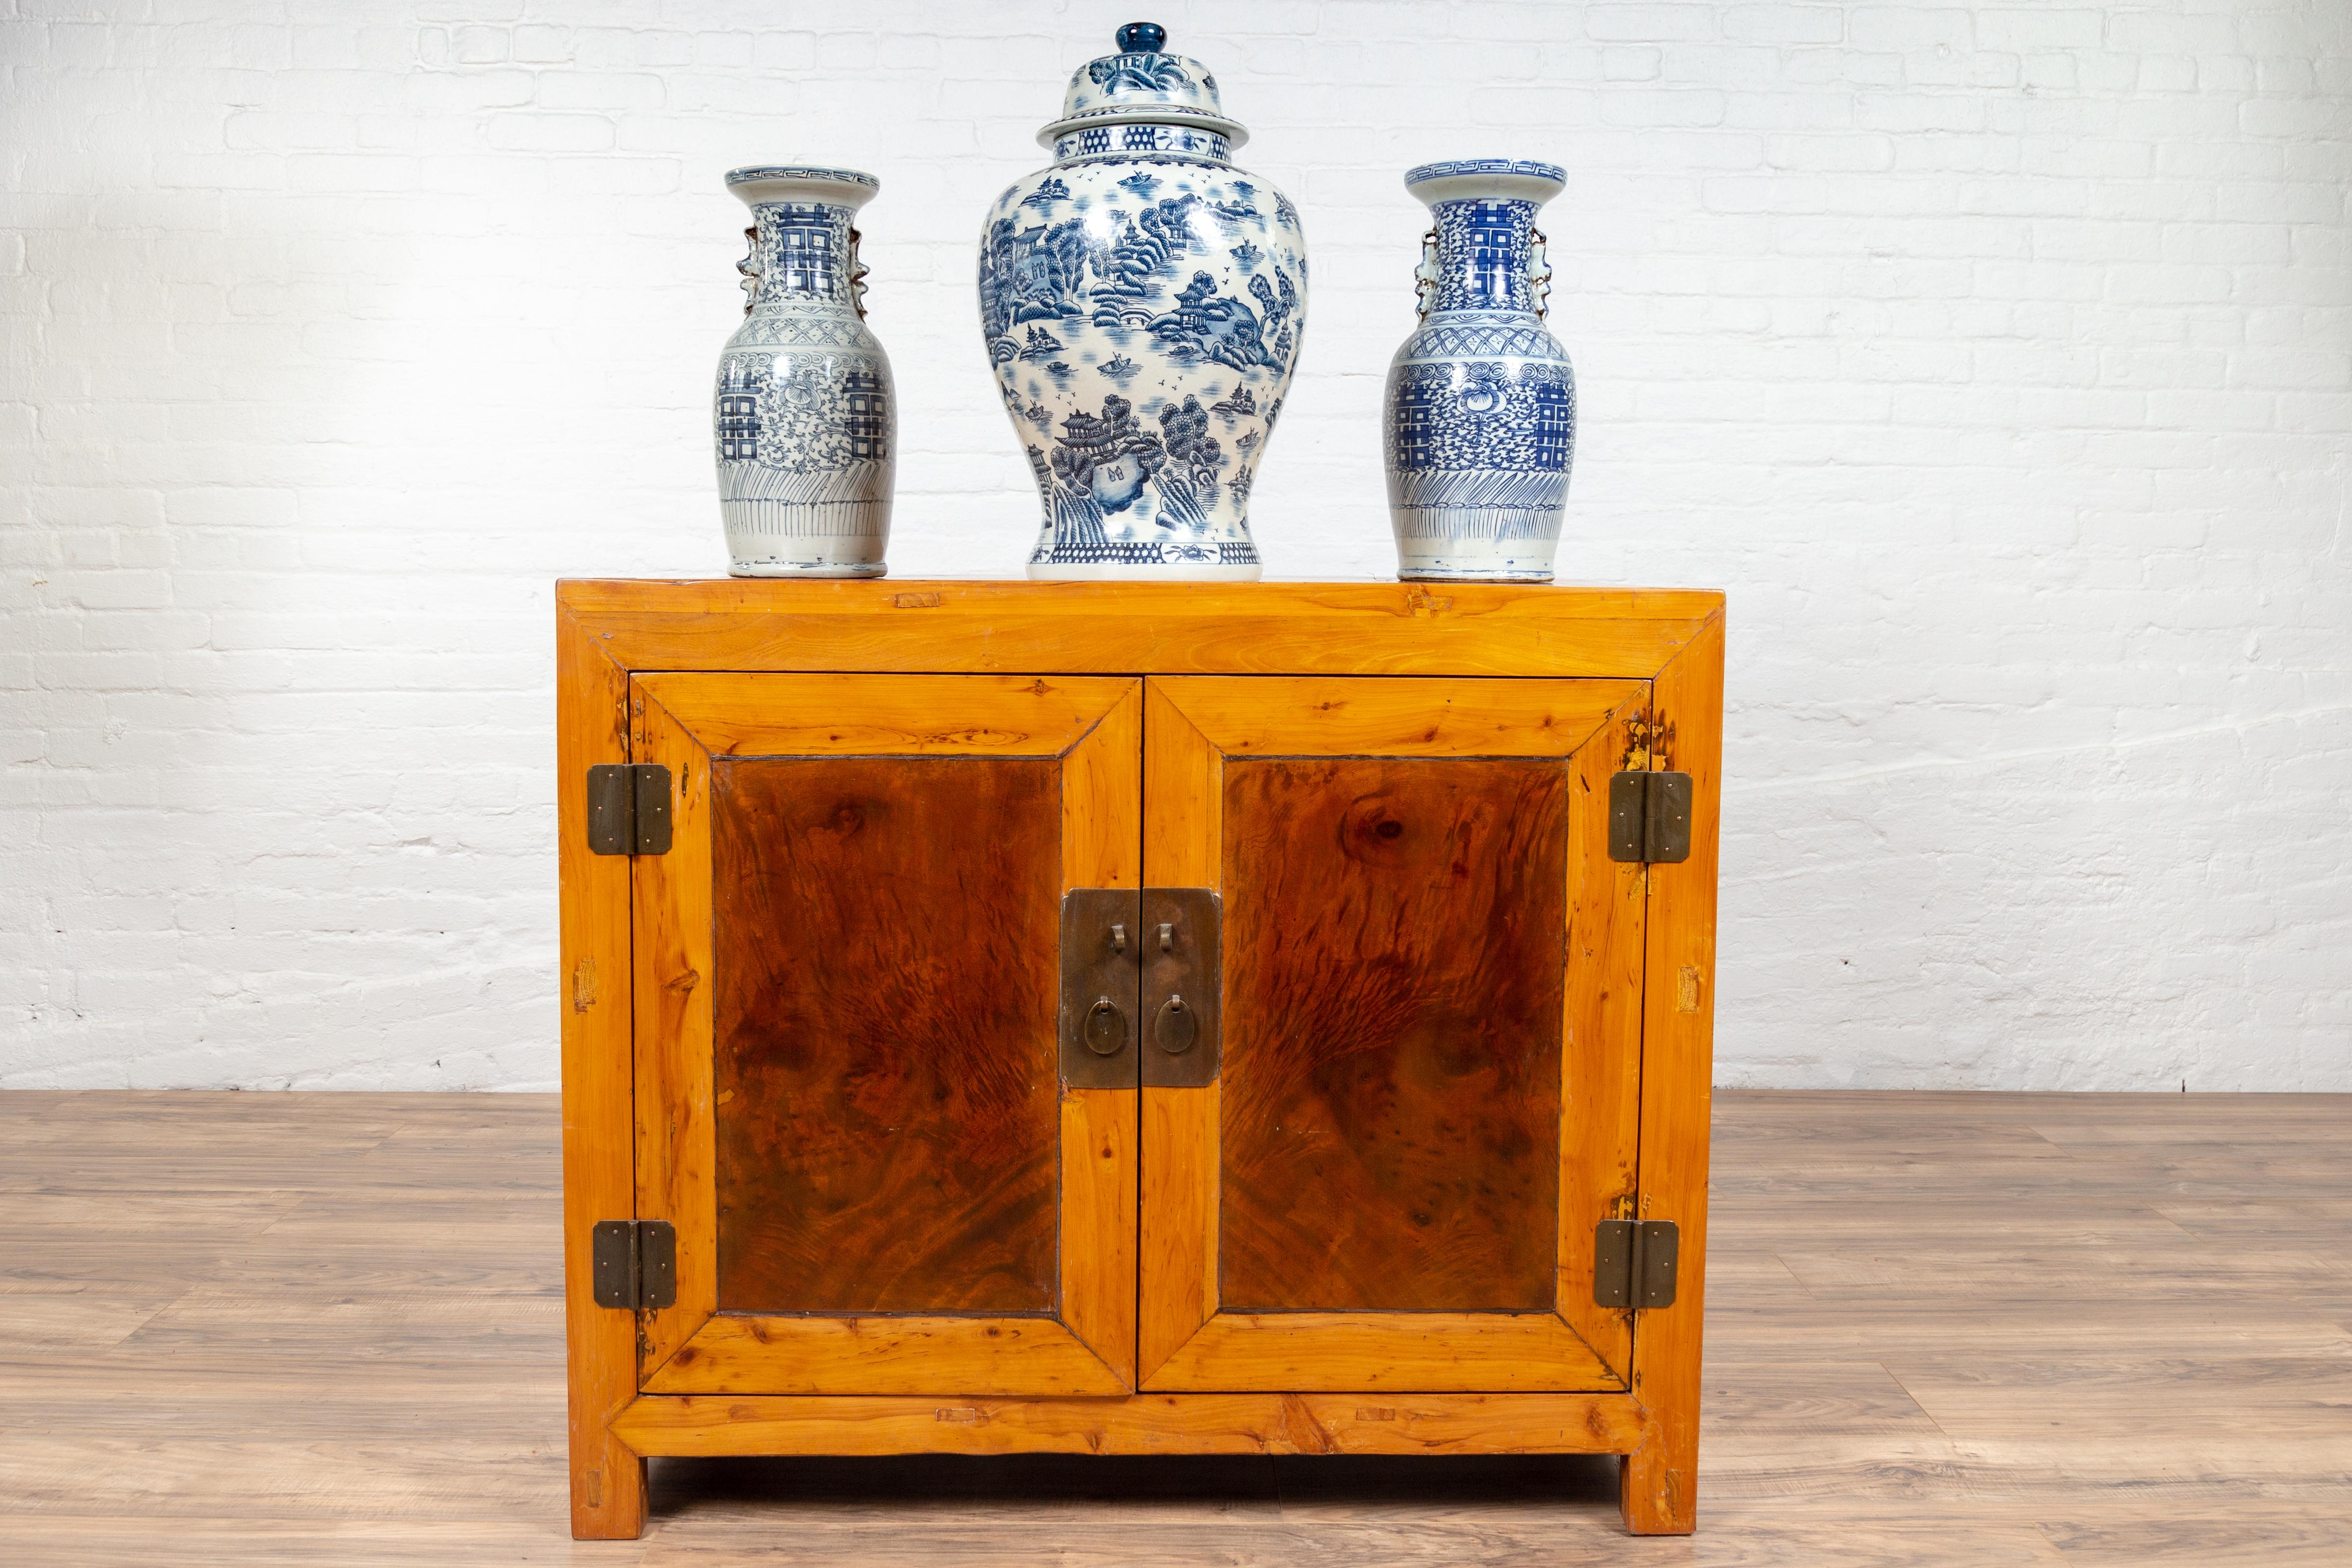 A large antique two-toned elm and burl wood Chinese cabinet from the early 20th century, with double doors and square lock. Born in China during the early years of the 20th century, this elegant cabinet presents a linear Silhouette. The rectangular